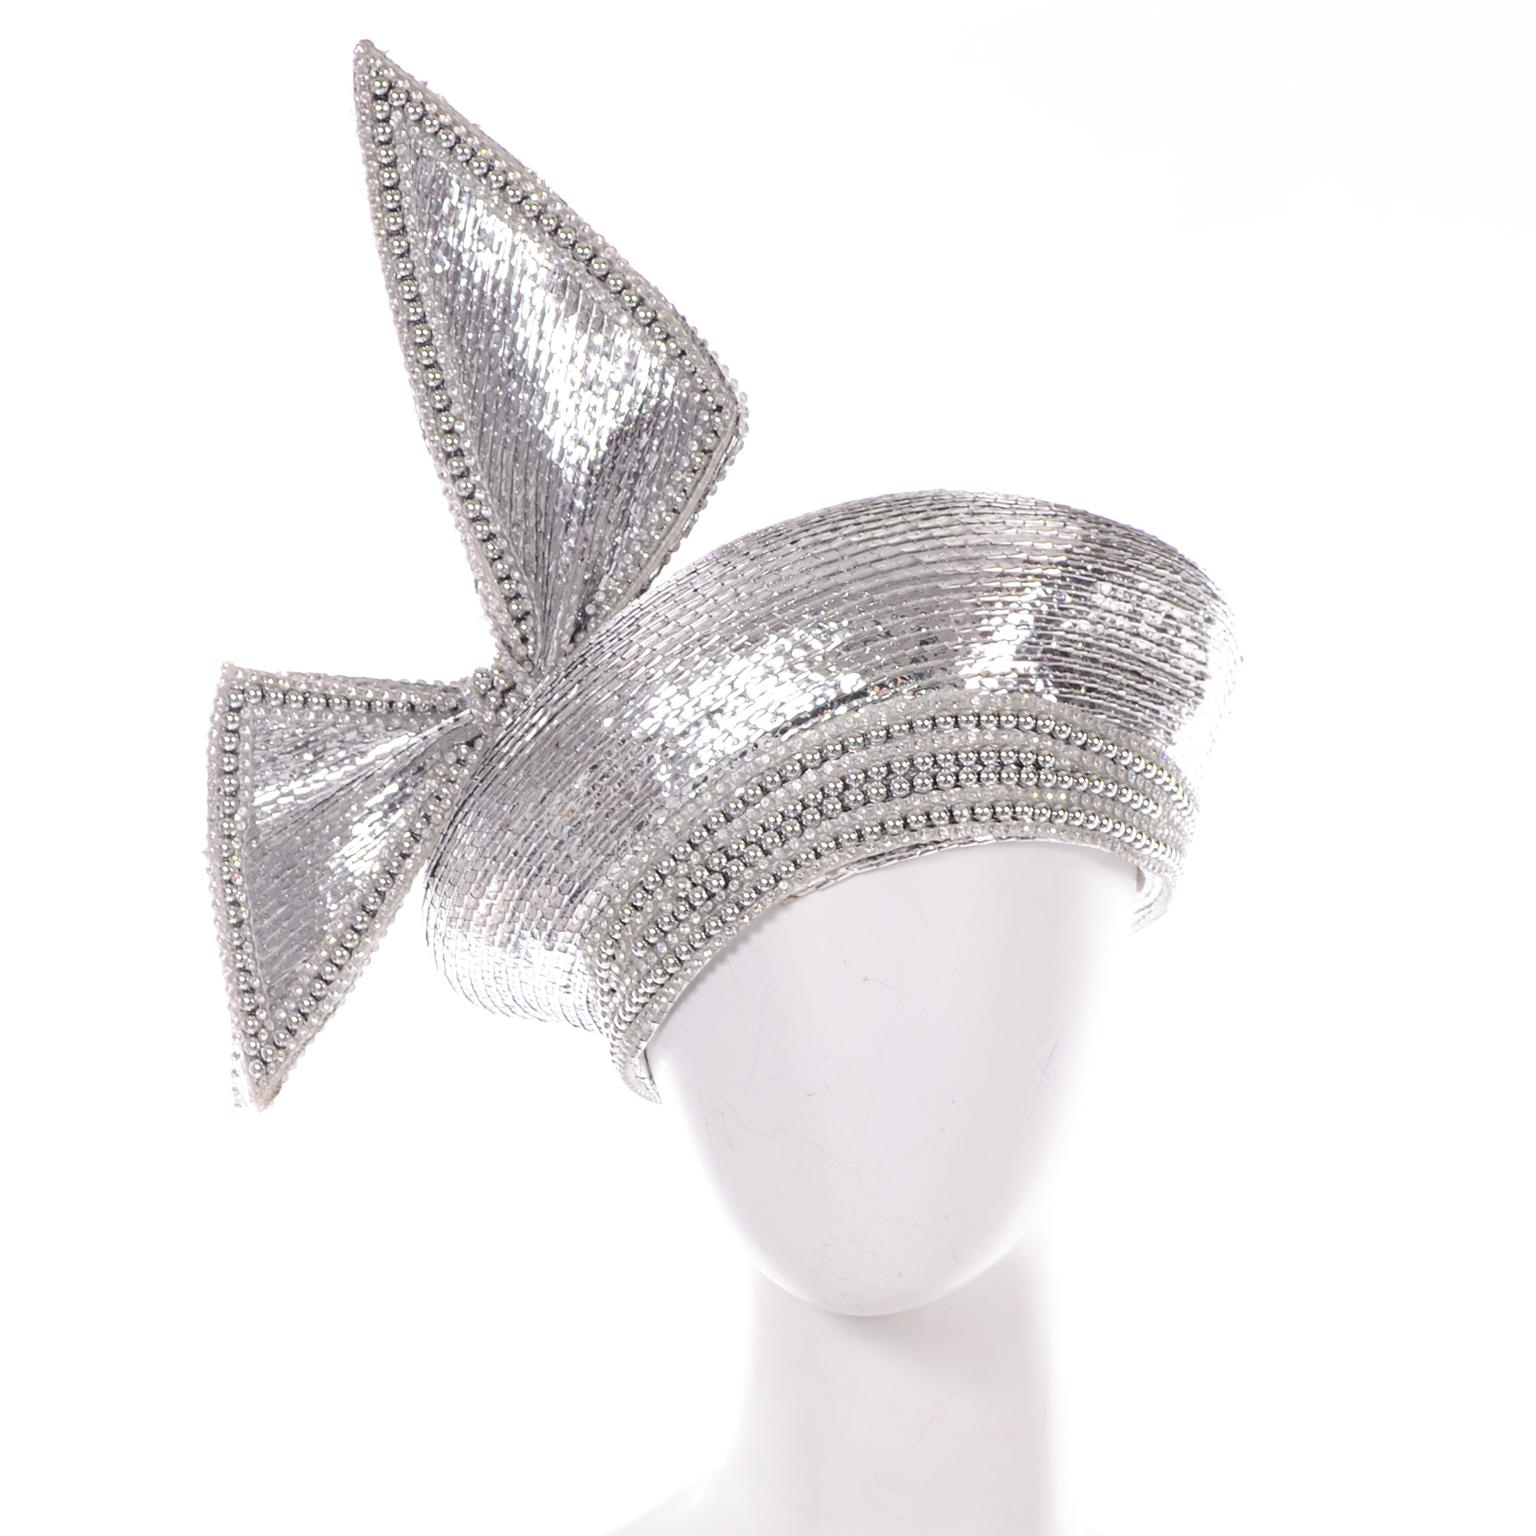 This is the perfect statement had from the 1960's designed by Jack McConnell. We love the small silver beads and crystal embellishments. This hat is a turban style with a big asymmetrical structured bow. The hat has the coveted Styled by Jack